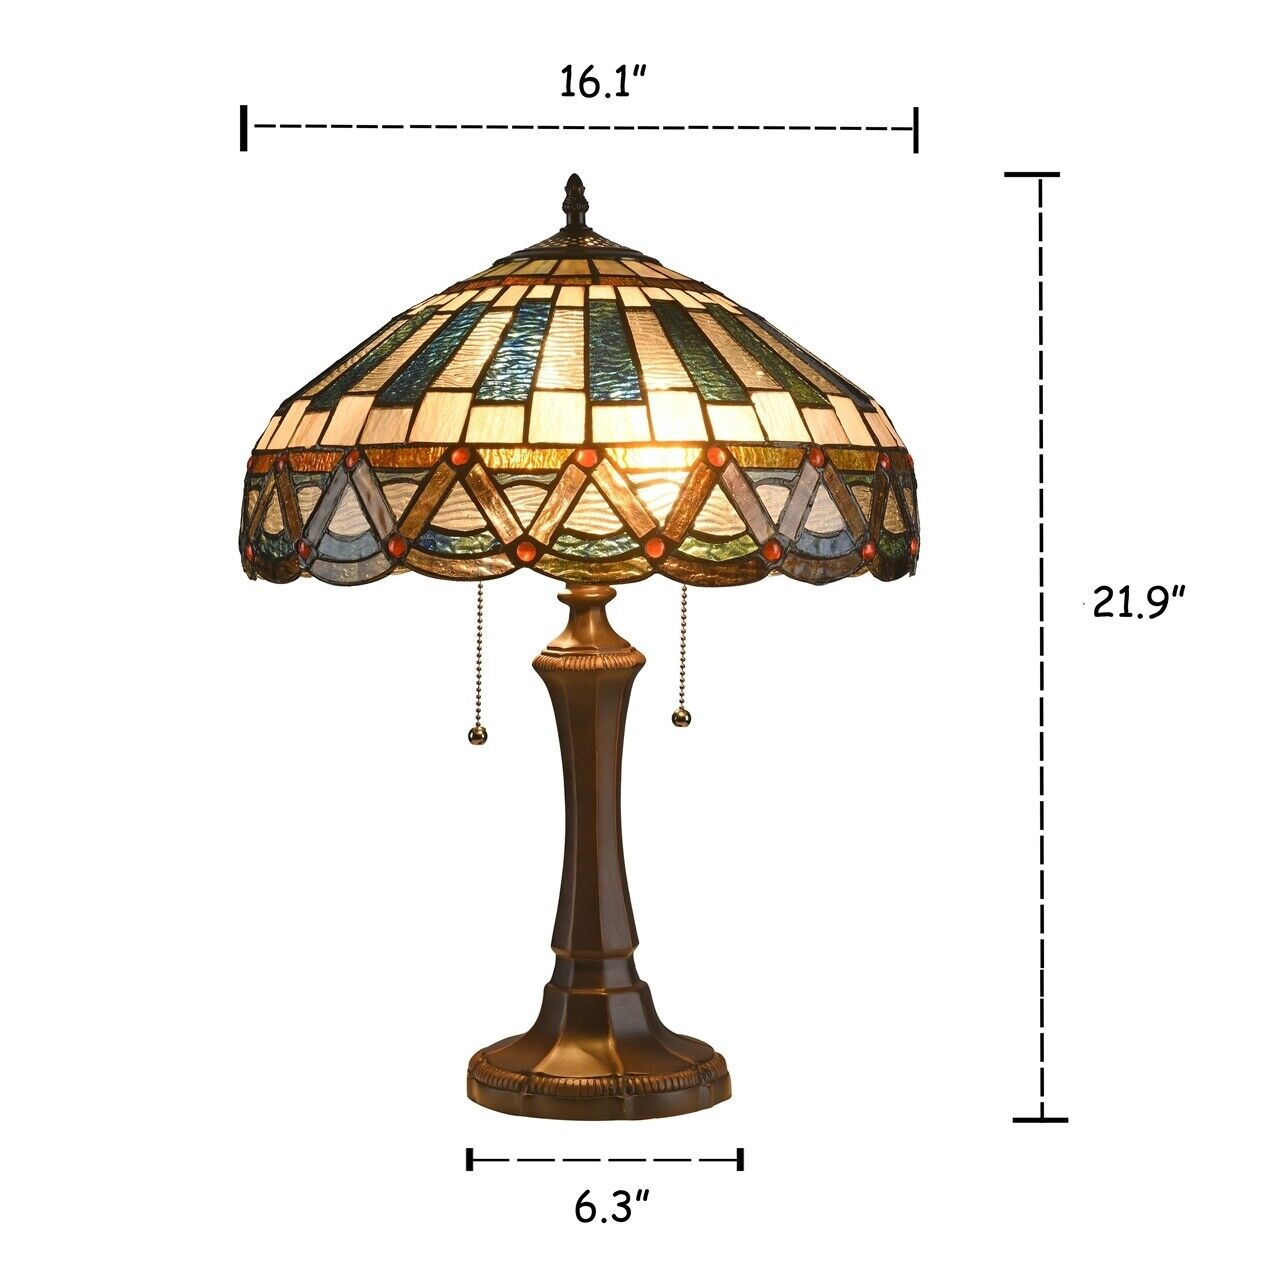 21.9" Antique Style Stained Glass Table Lamp 16.1" Shade